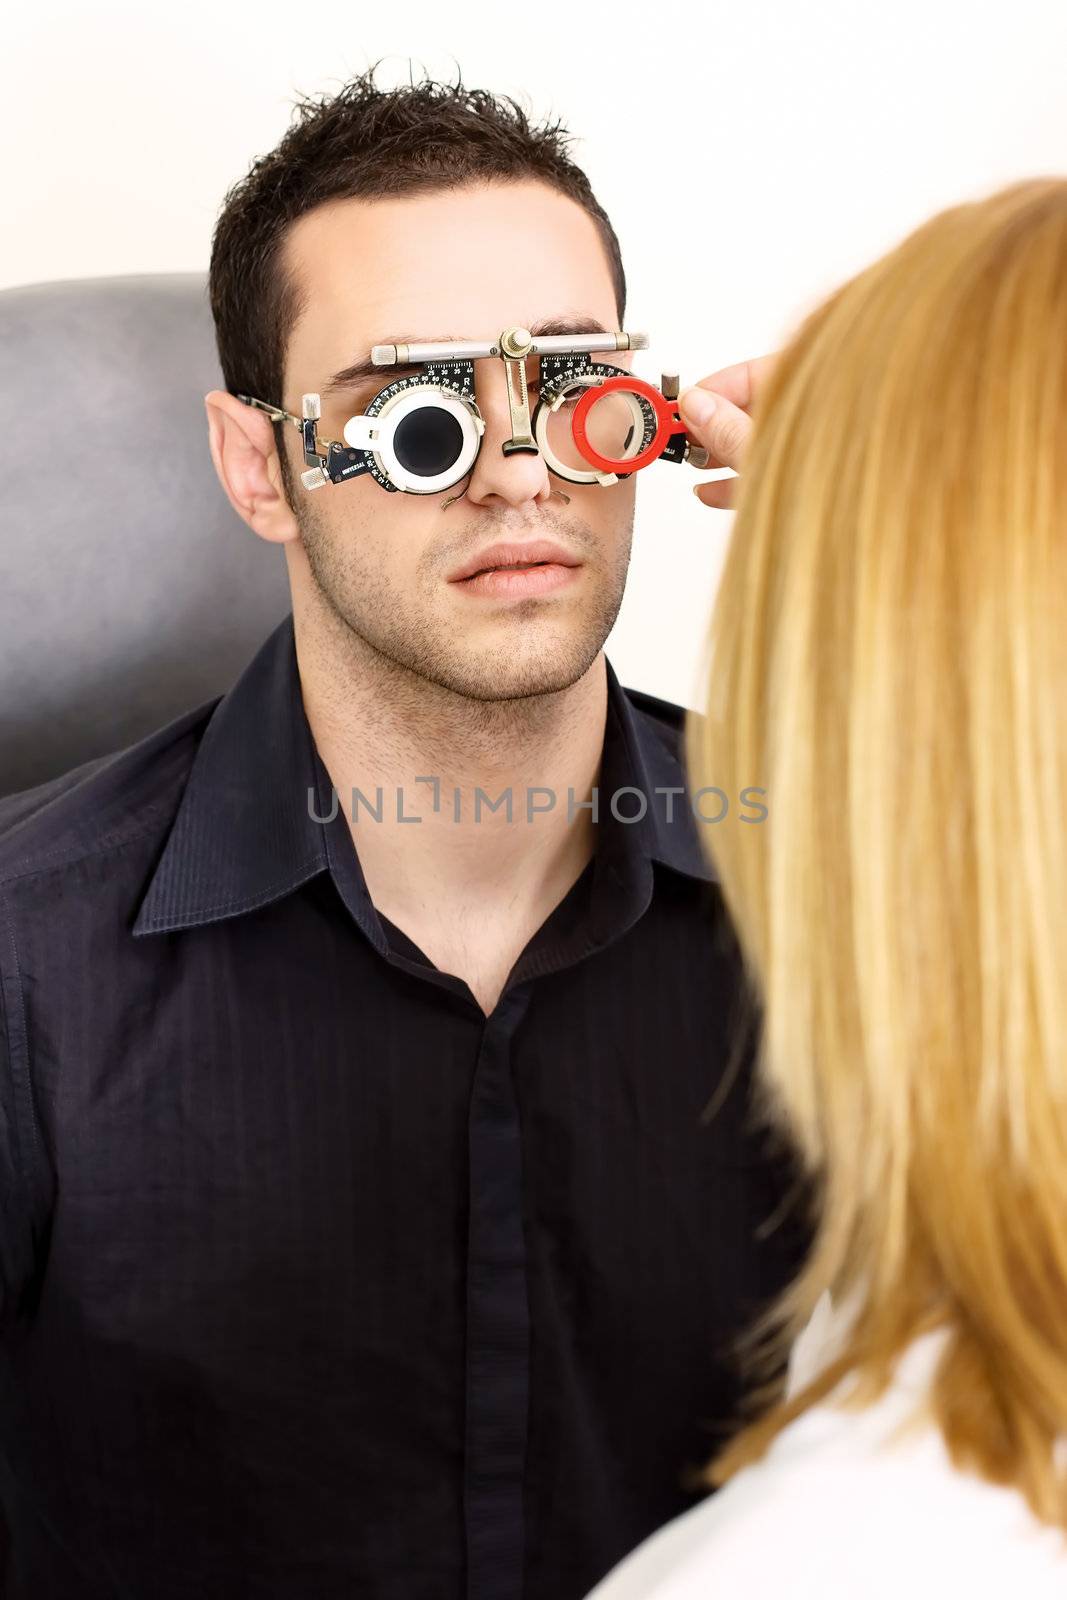 Male patient on medical attendance at the optometrist, wearing trial frame for eye testing